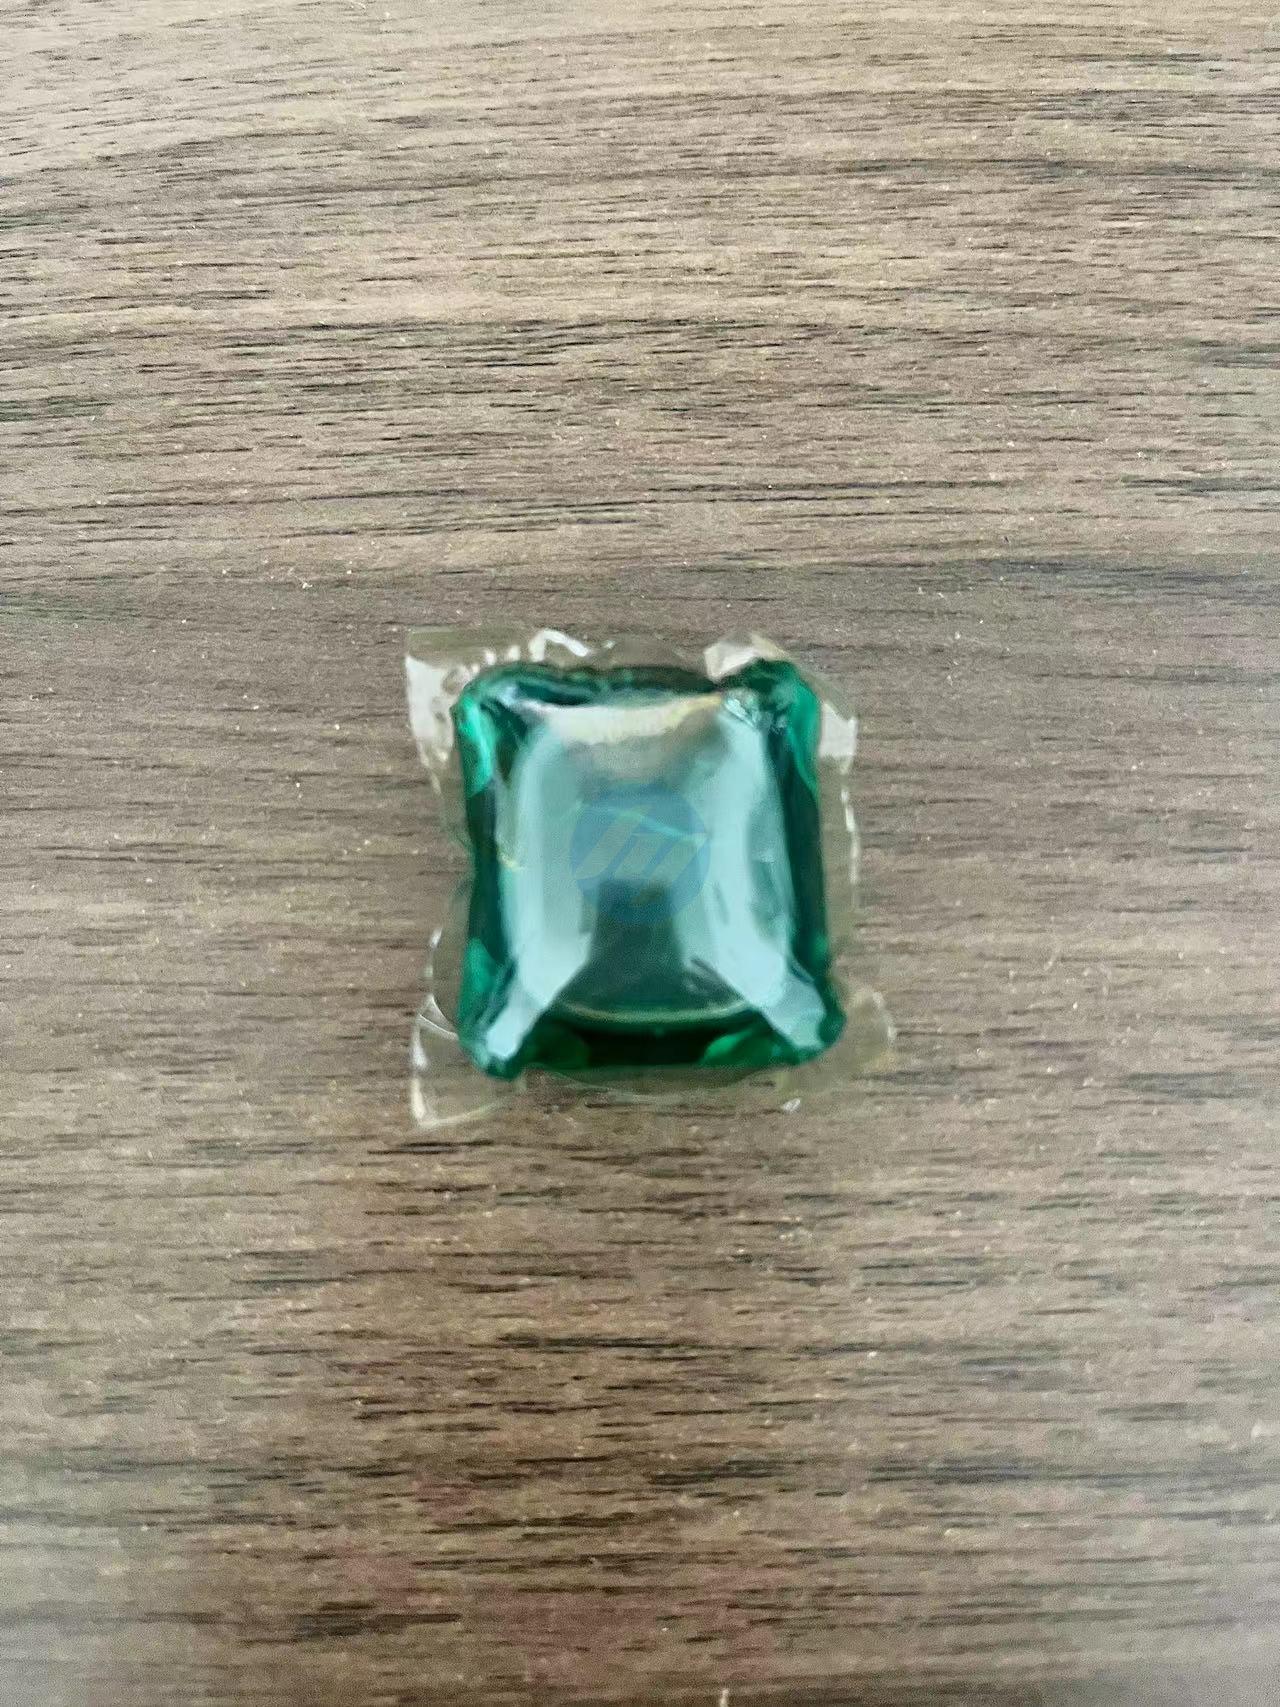 14g Square laundry beads